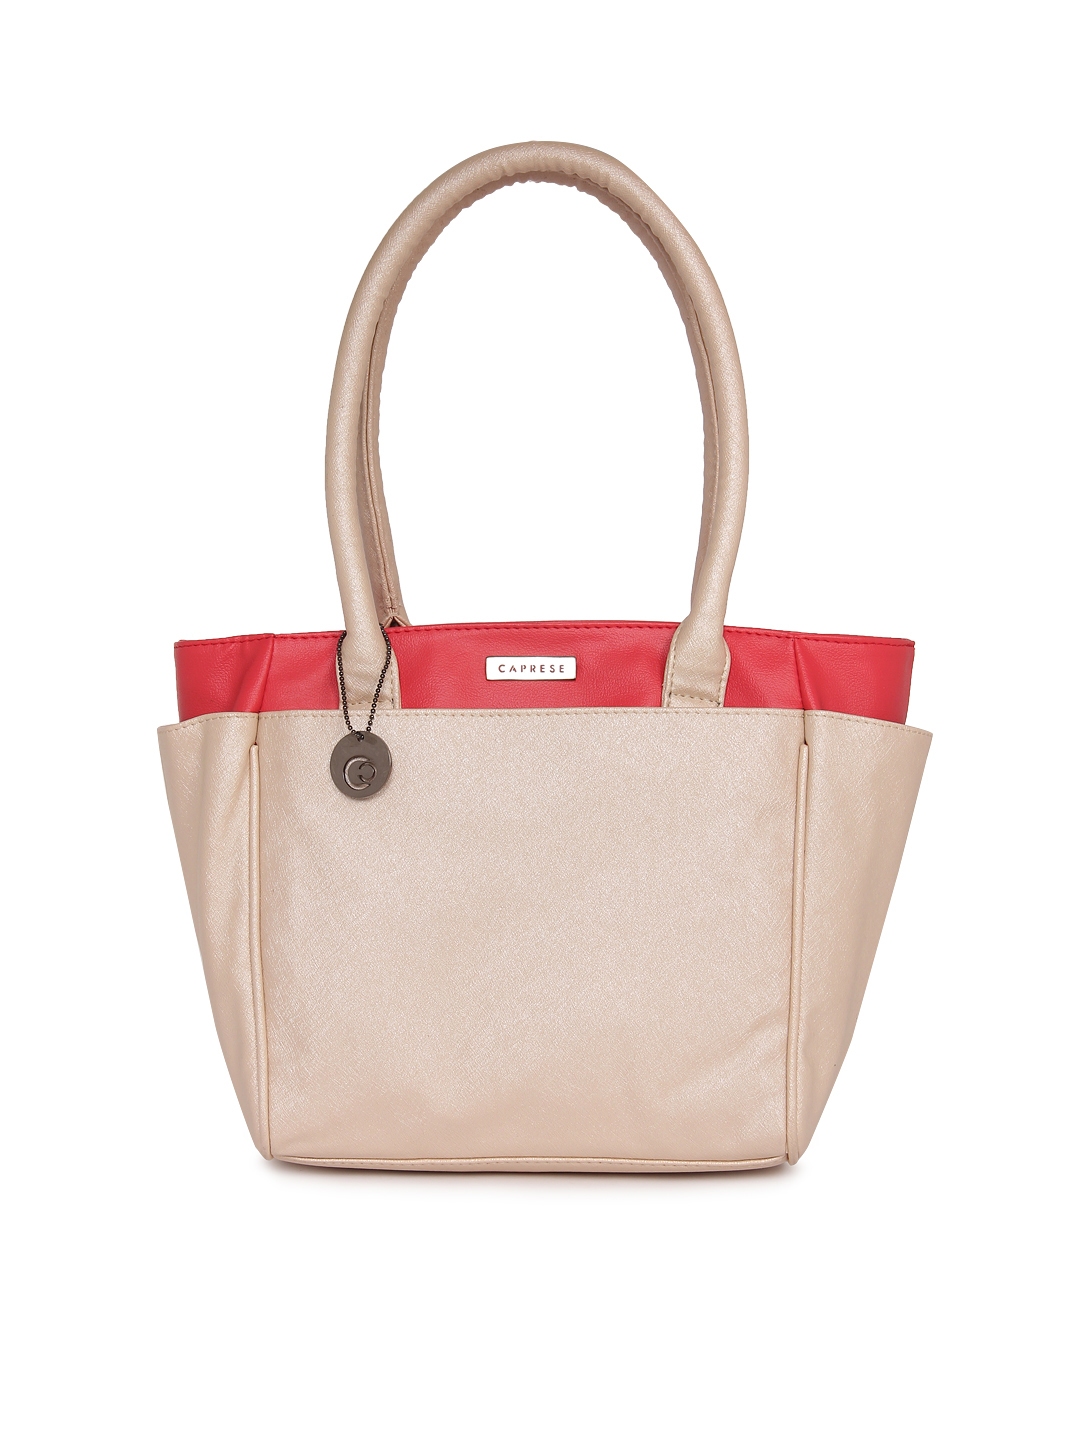 Buy Caprese Off White Solid Tote Bag - Handbags for Women 1954489 | Myntra